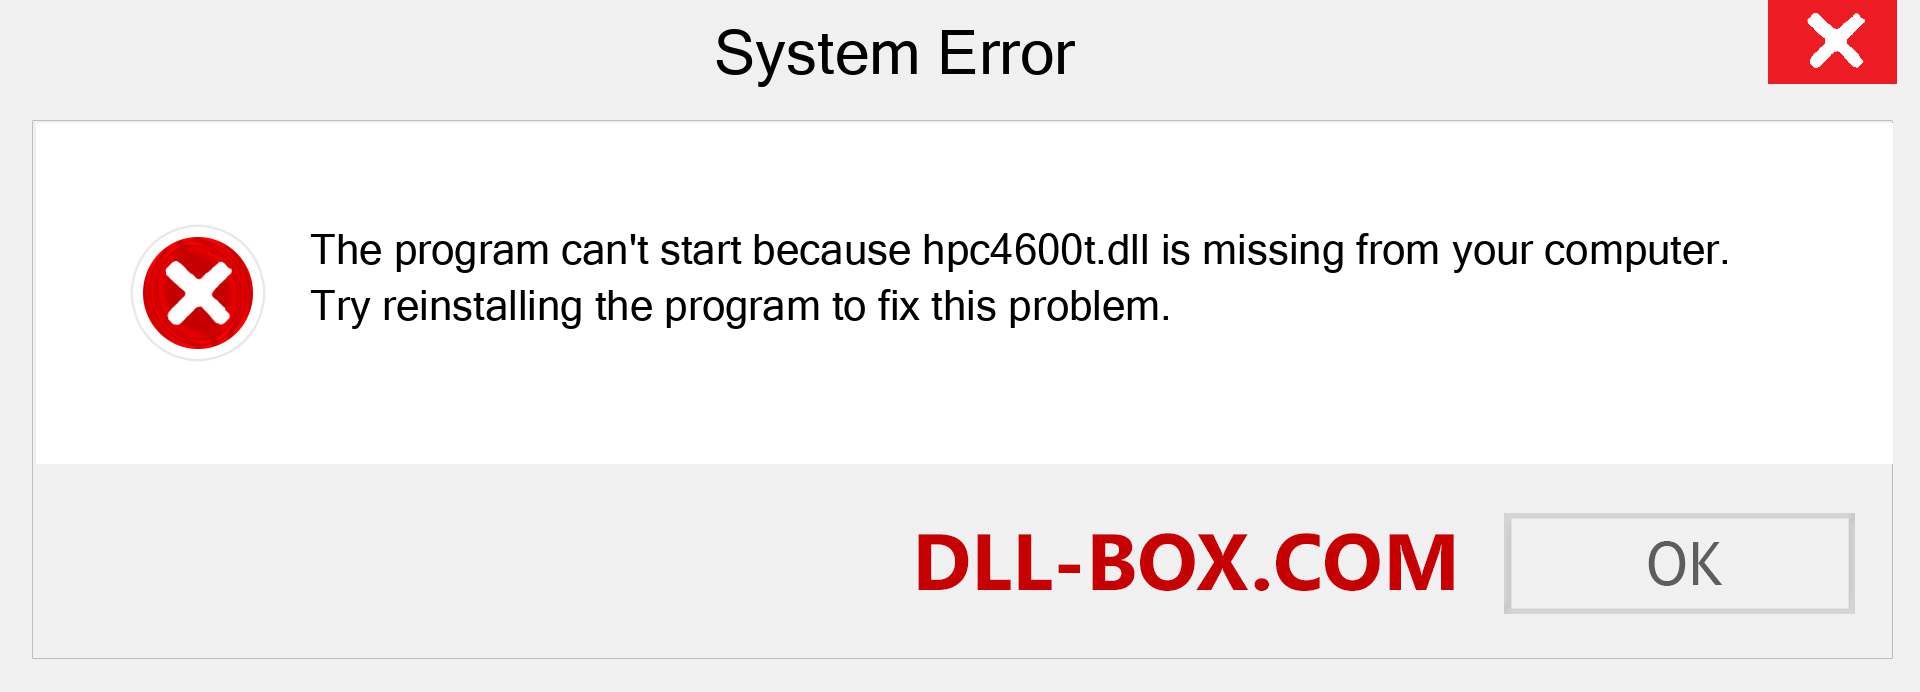  hpc4600t.dll file is missing?. Download for Windows 7, 8, 10 - Fix  hpc4600t dll Missing Error on Windows, photos, images